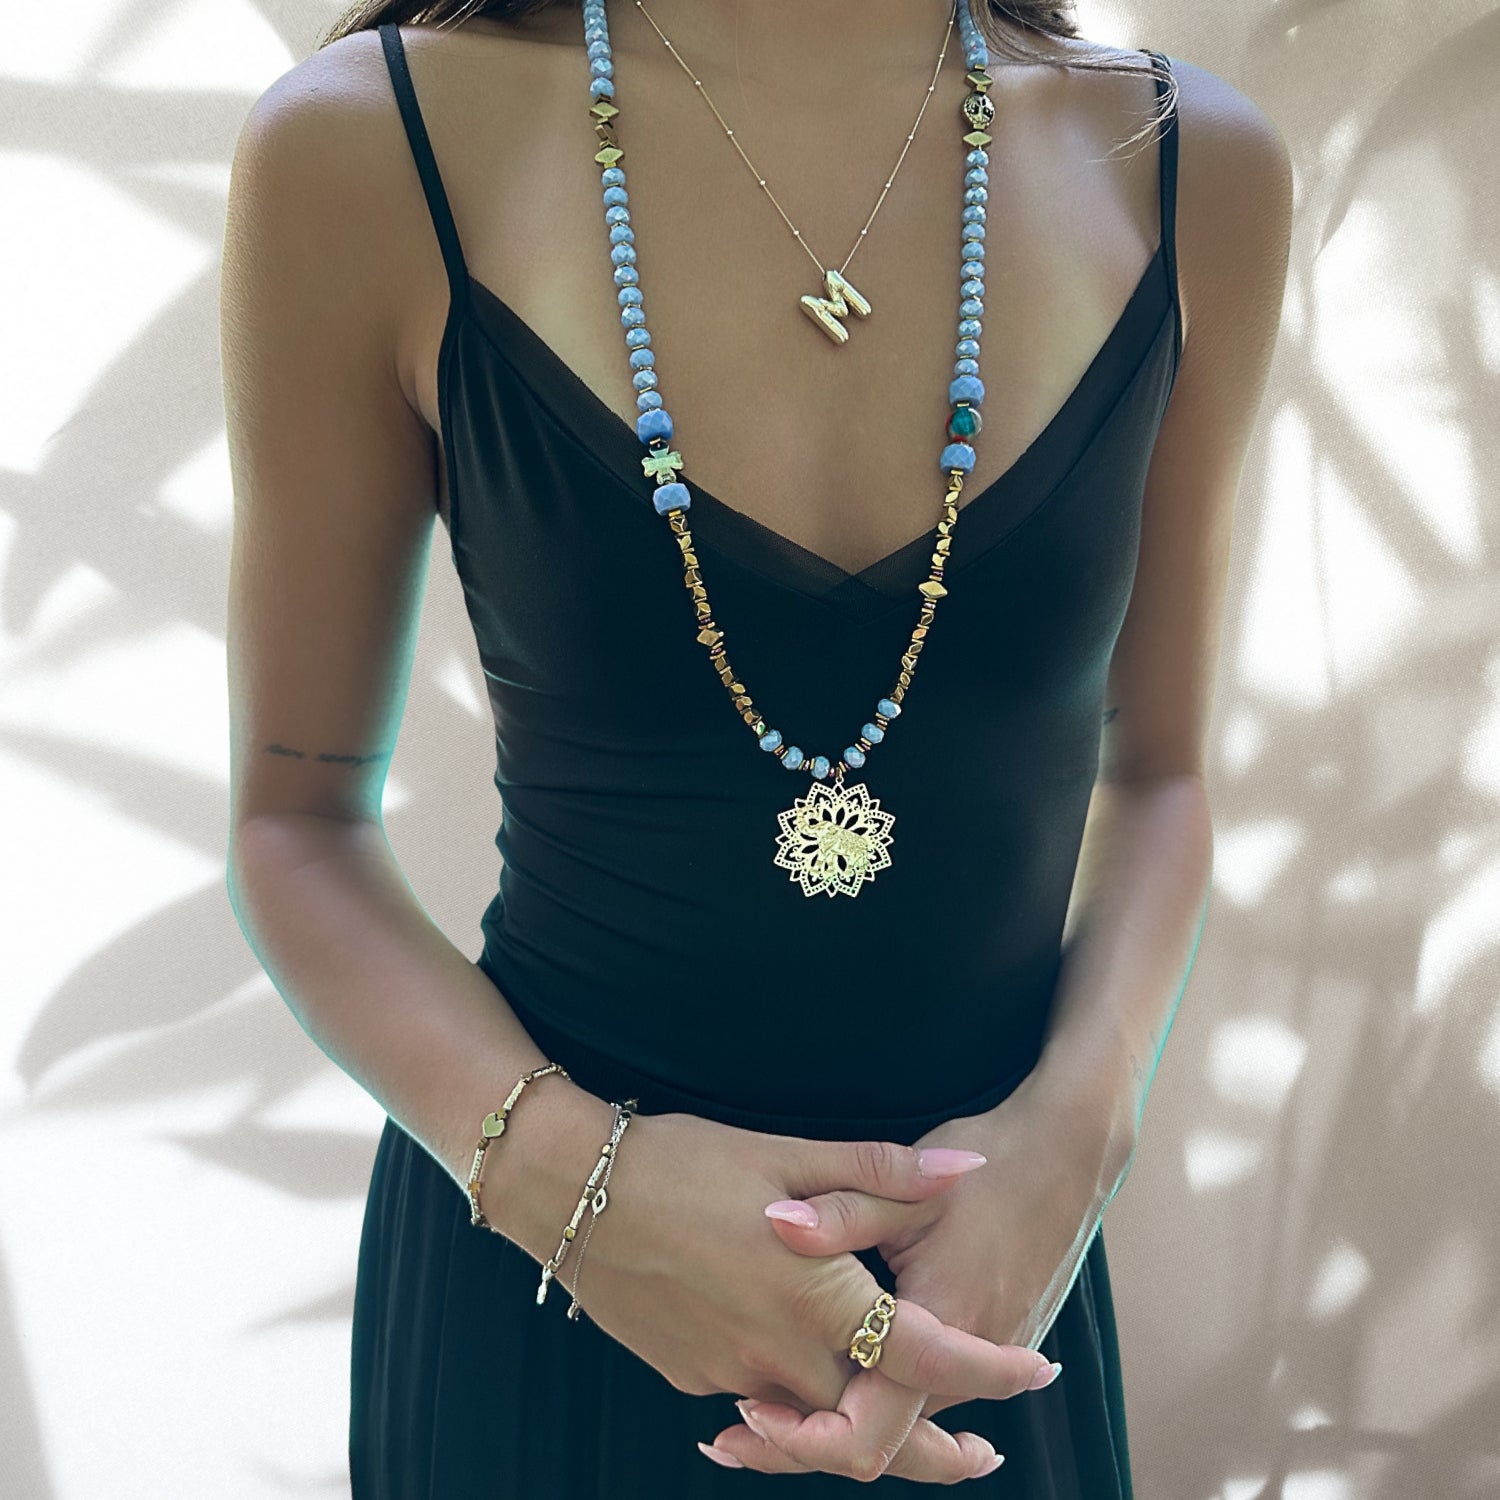 Model wearing the Blue Magic Gold Elephant Necklace, showcasing its elegant design and complementing the neckline.